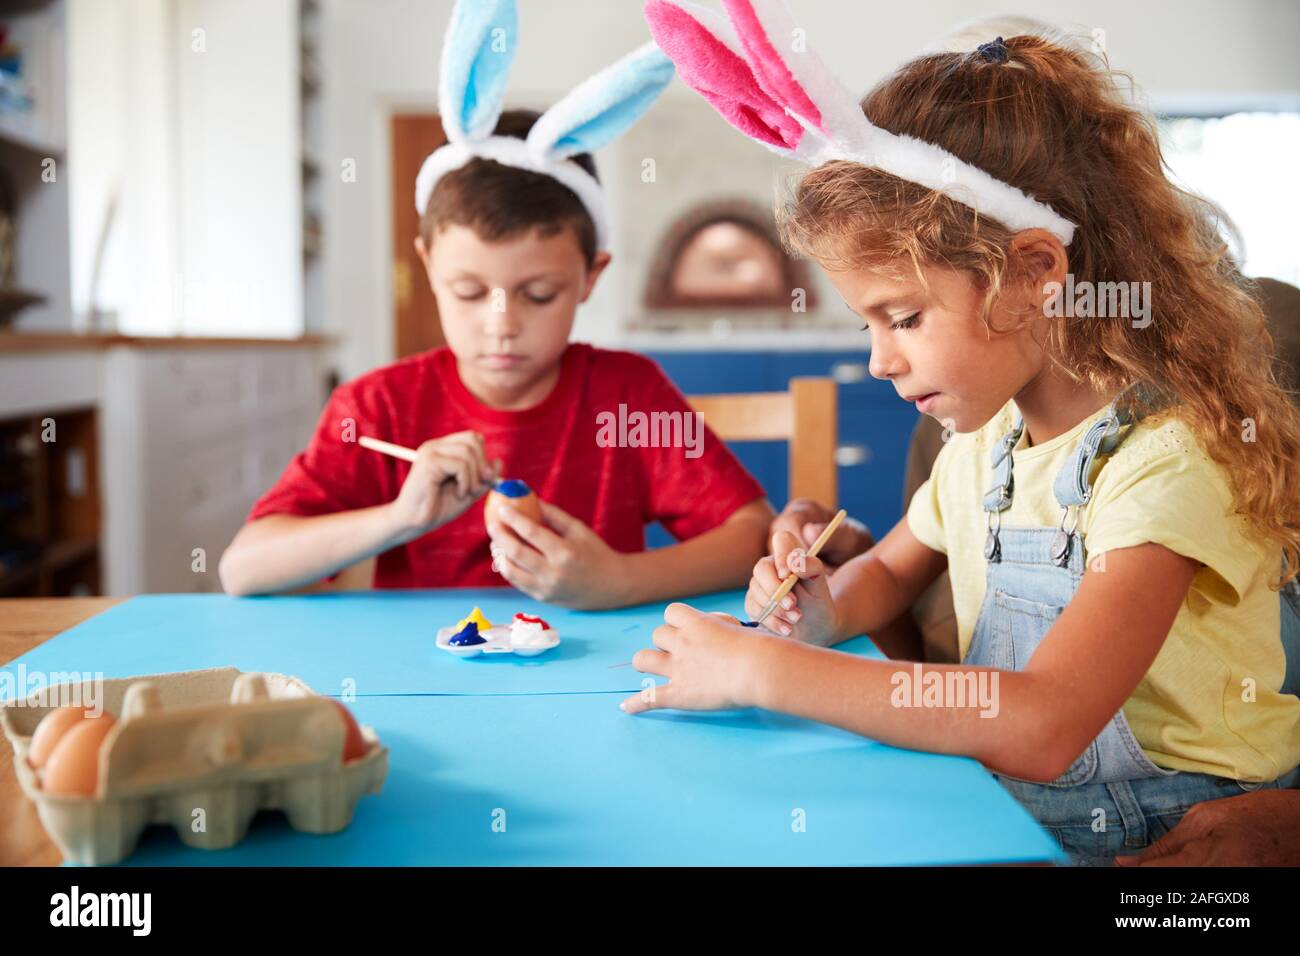 Children Wearing Rabbit Ears Decorating Easter Eggs At Home Together Stock Photo